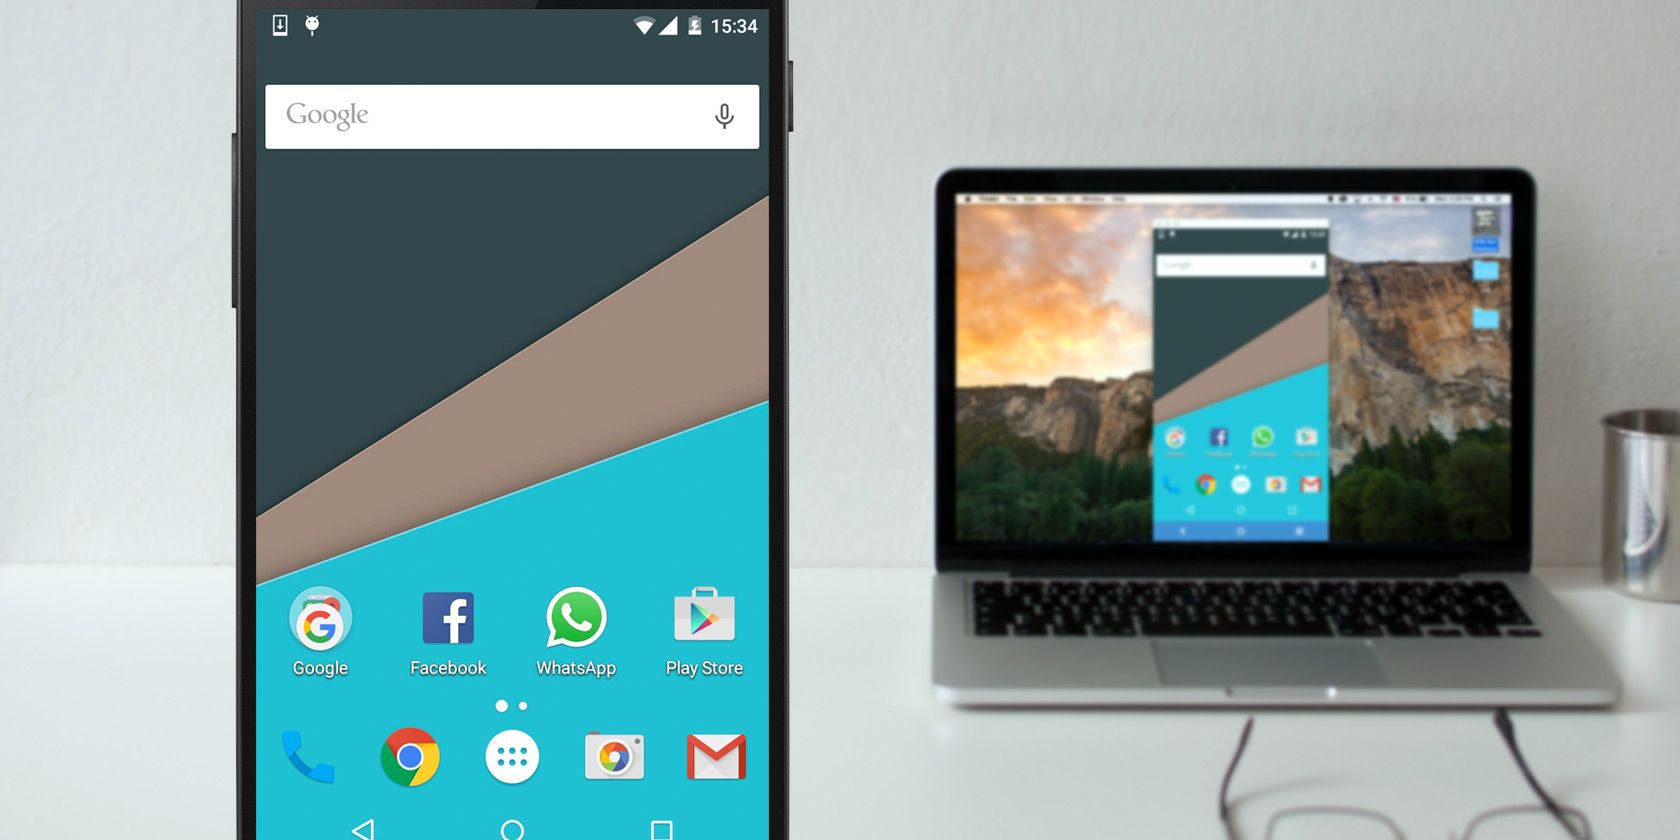 Mirror Your Android Screen To Pc Or Mac, How To Mirror Android Screen On Windows 10